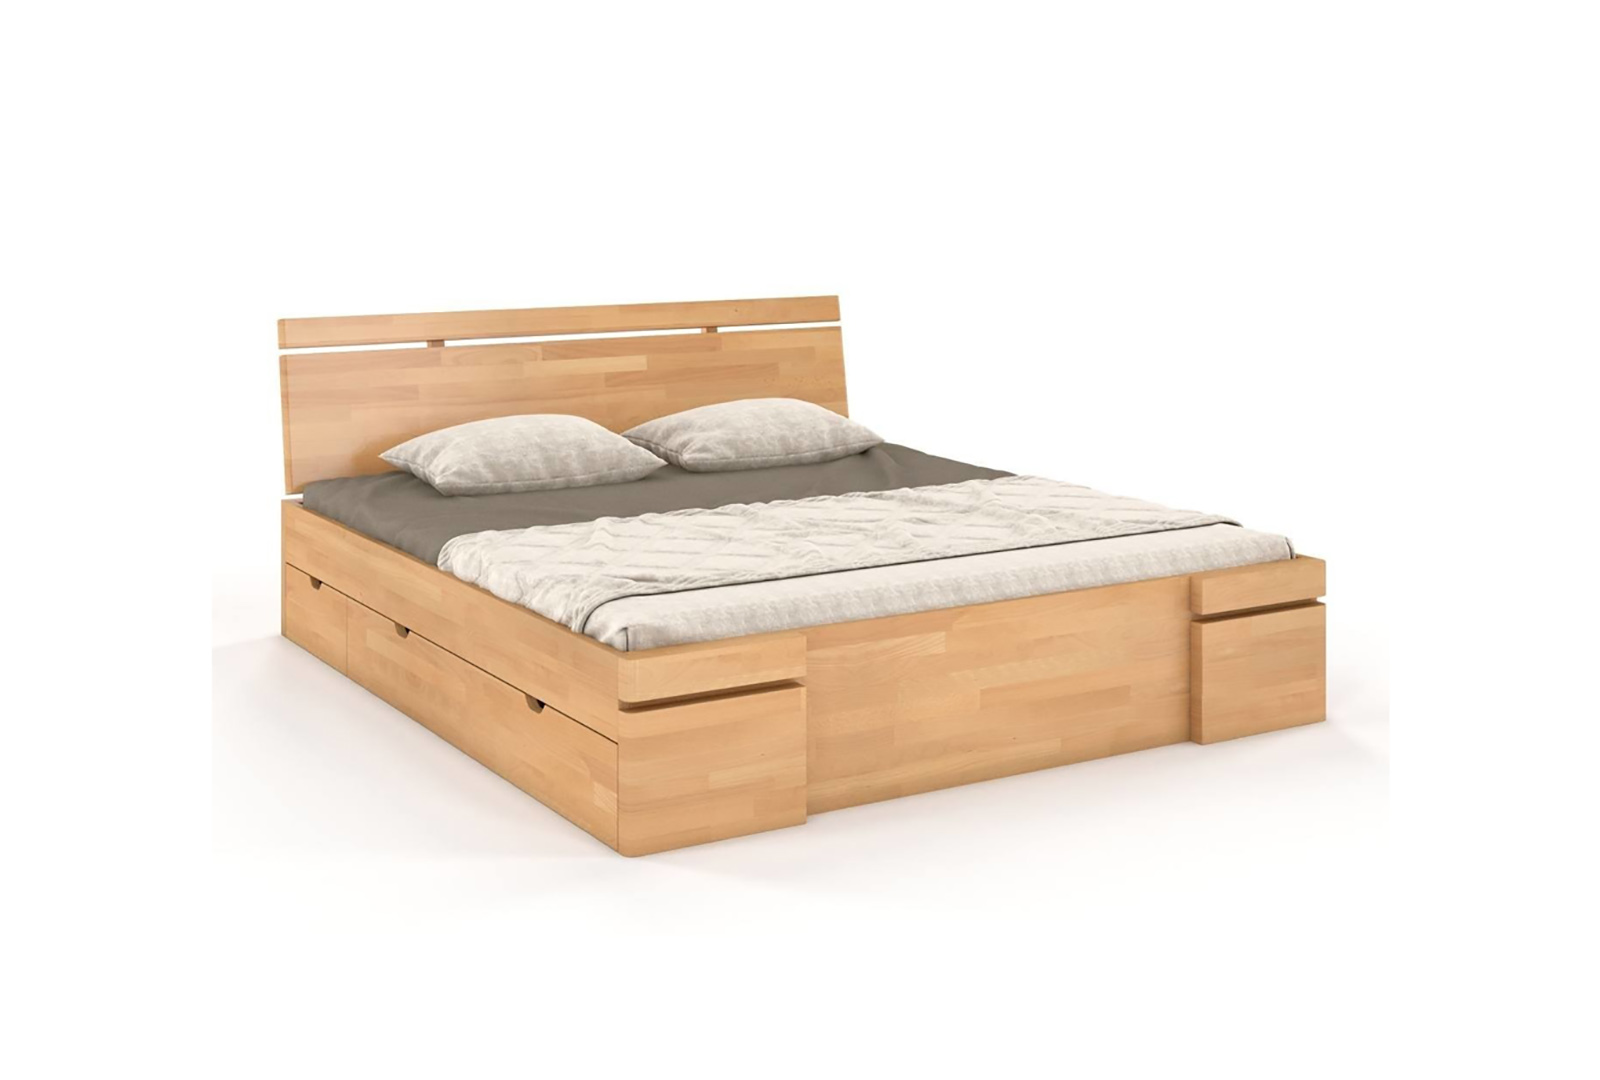 WOODEN BEECH BED WITH DRAWERS SKANDICA SPARTA MAXI AND DR 1